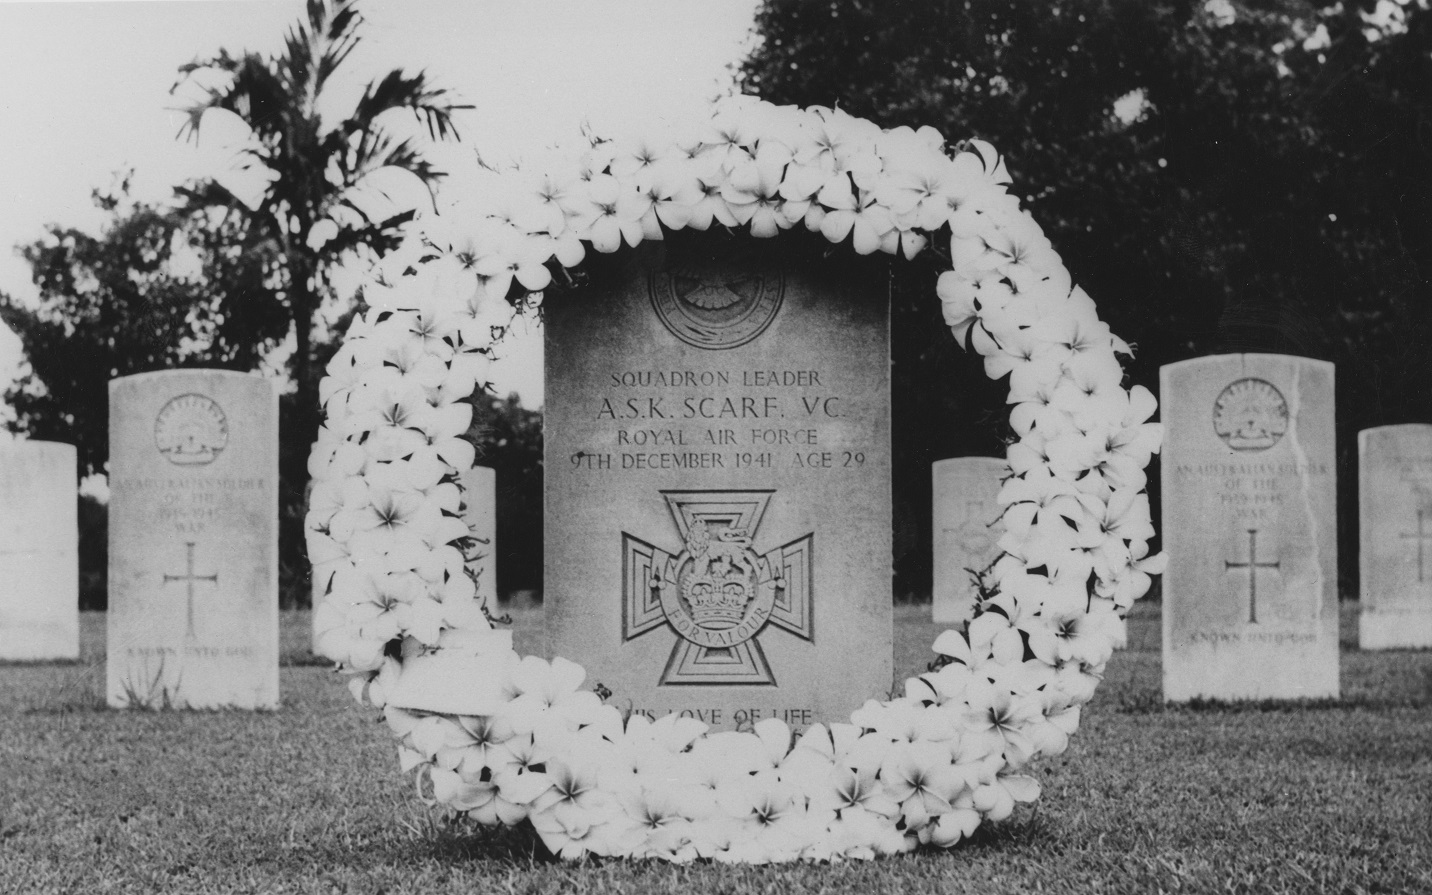 Black and white image shows Arthur Scarfs headstone with a wreath of flowers in the cemetery.